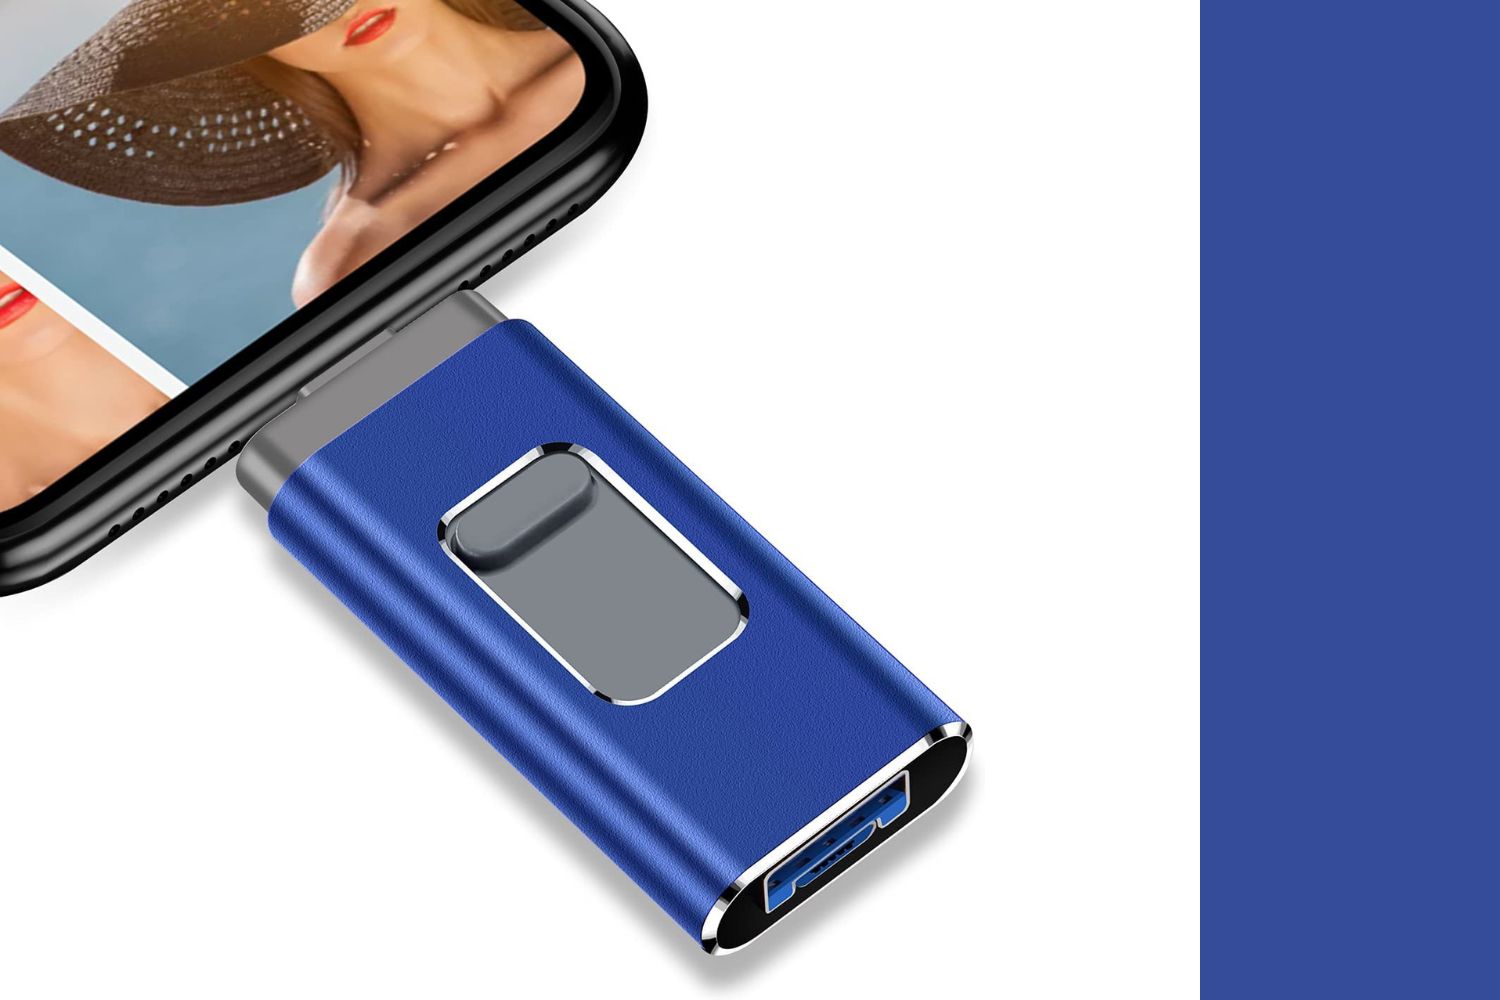 1TB 512GB USB 3.0 Flash Drive Memory Stick Type C 4in1 For iPhone